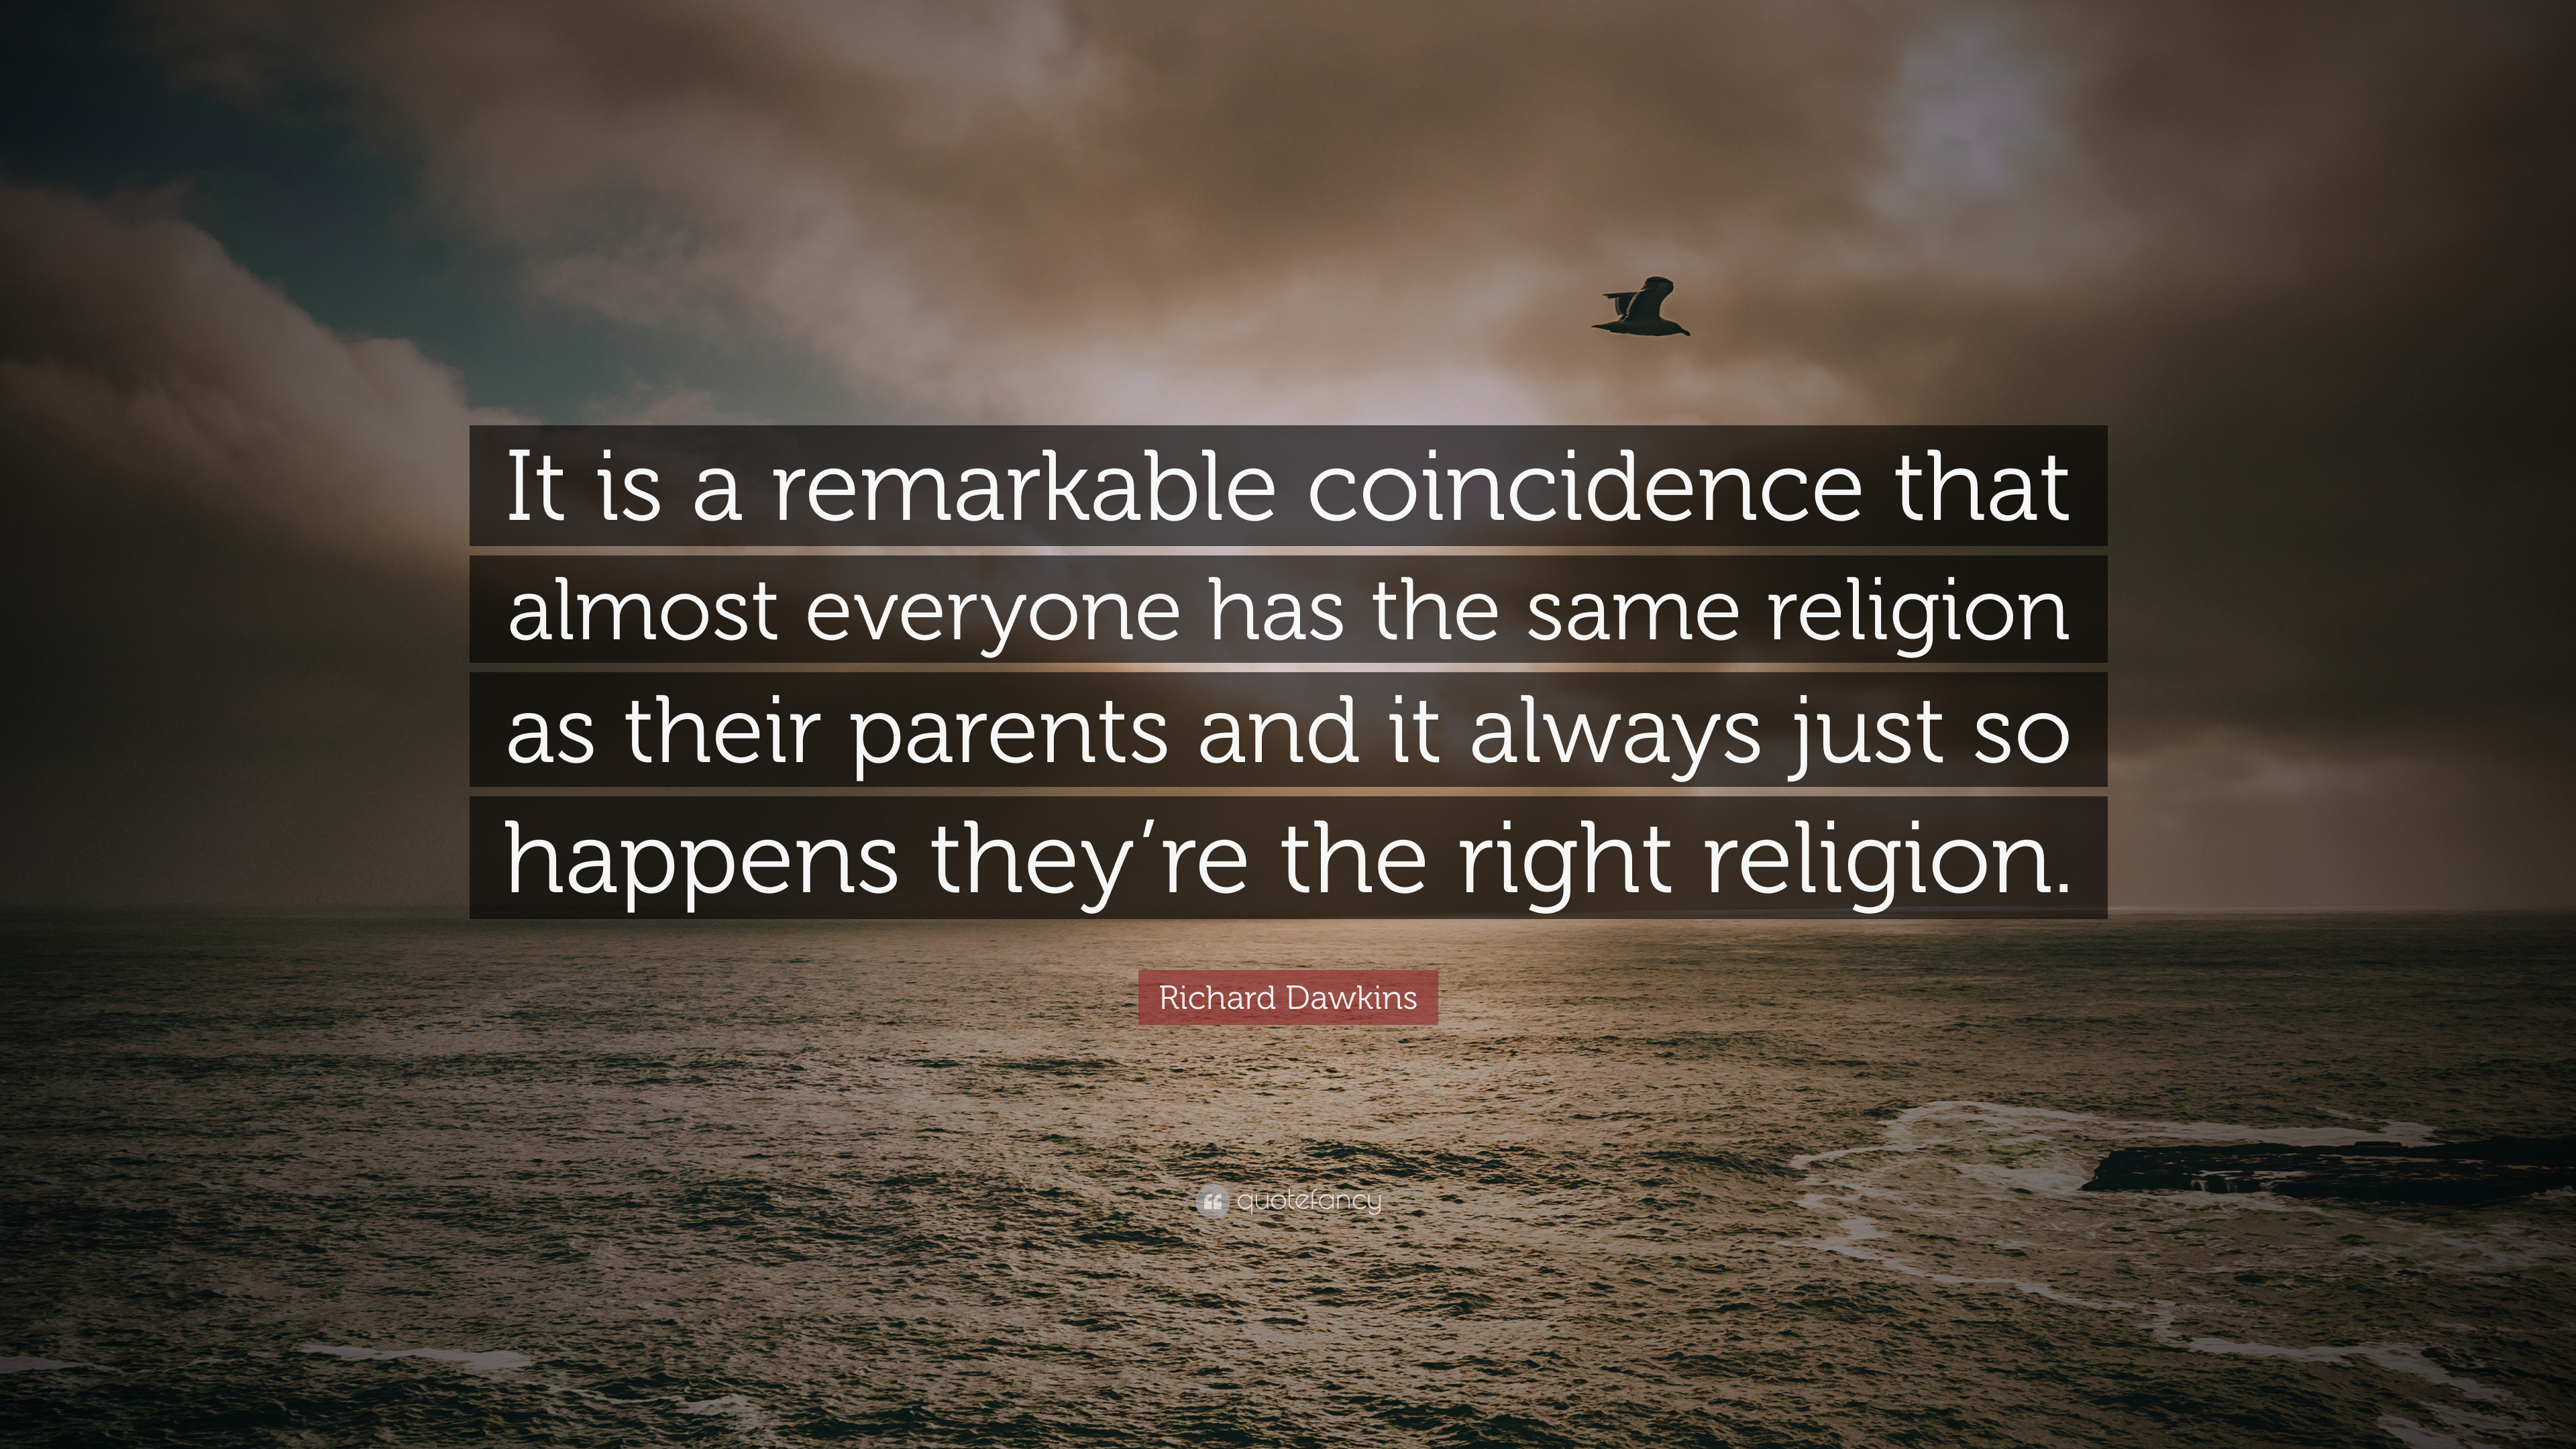 it is a remarkable conincident that almost everyone has the same religion as their parents and it always just so happens they’re the right religion. richard dawkins